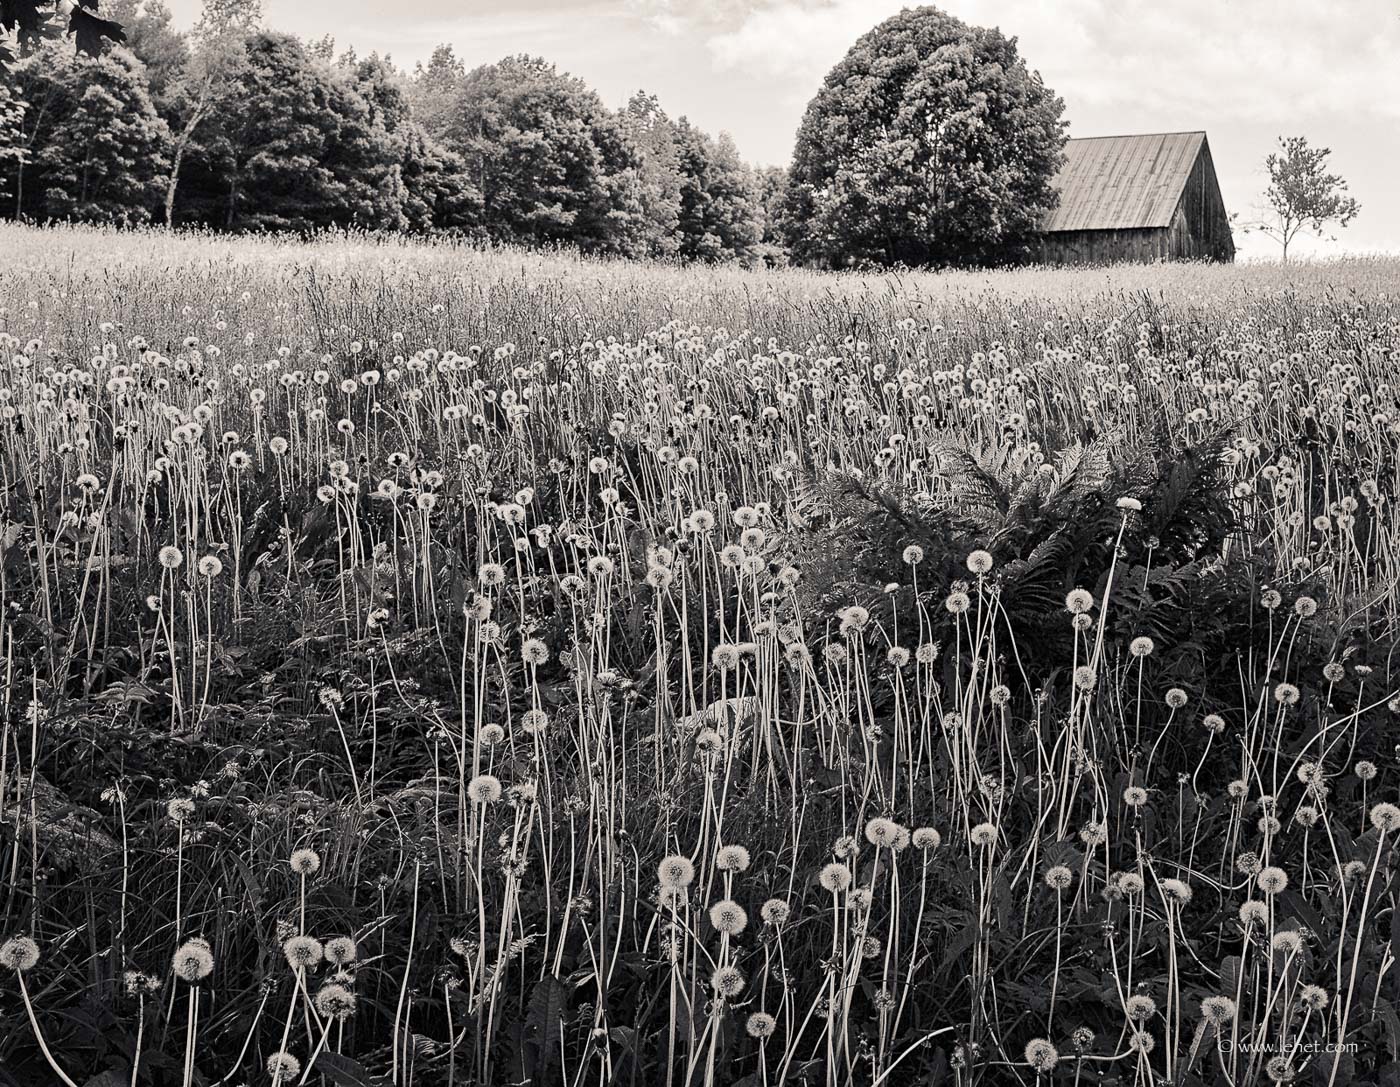 Dandelions and Barn, Vermont